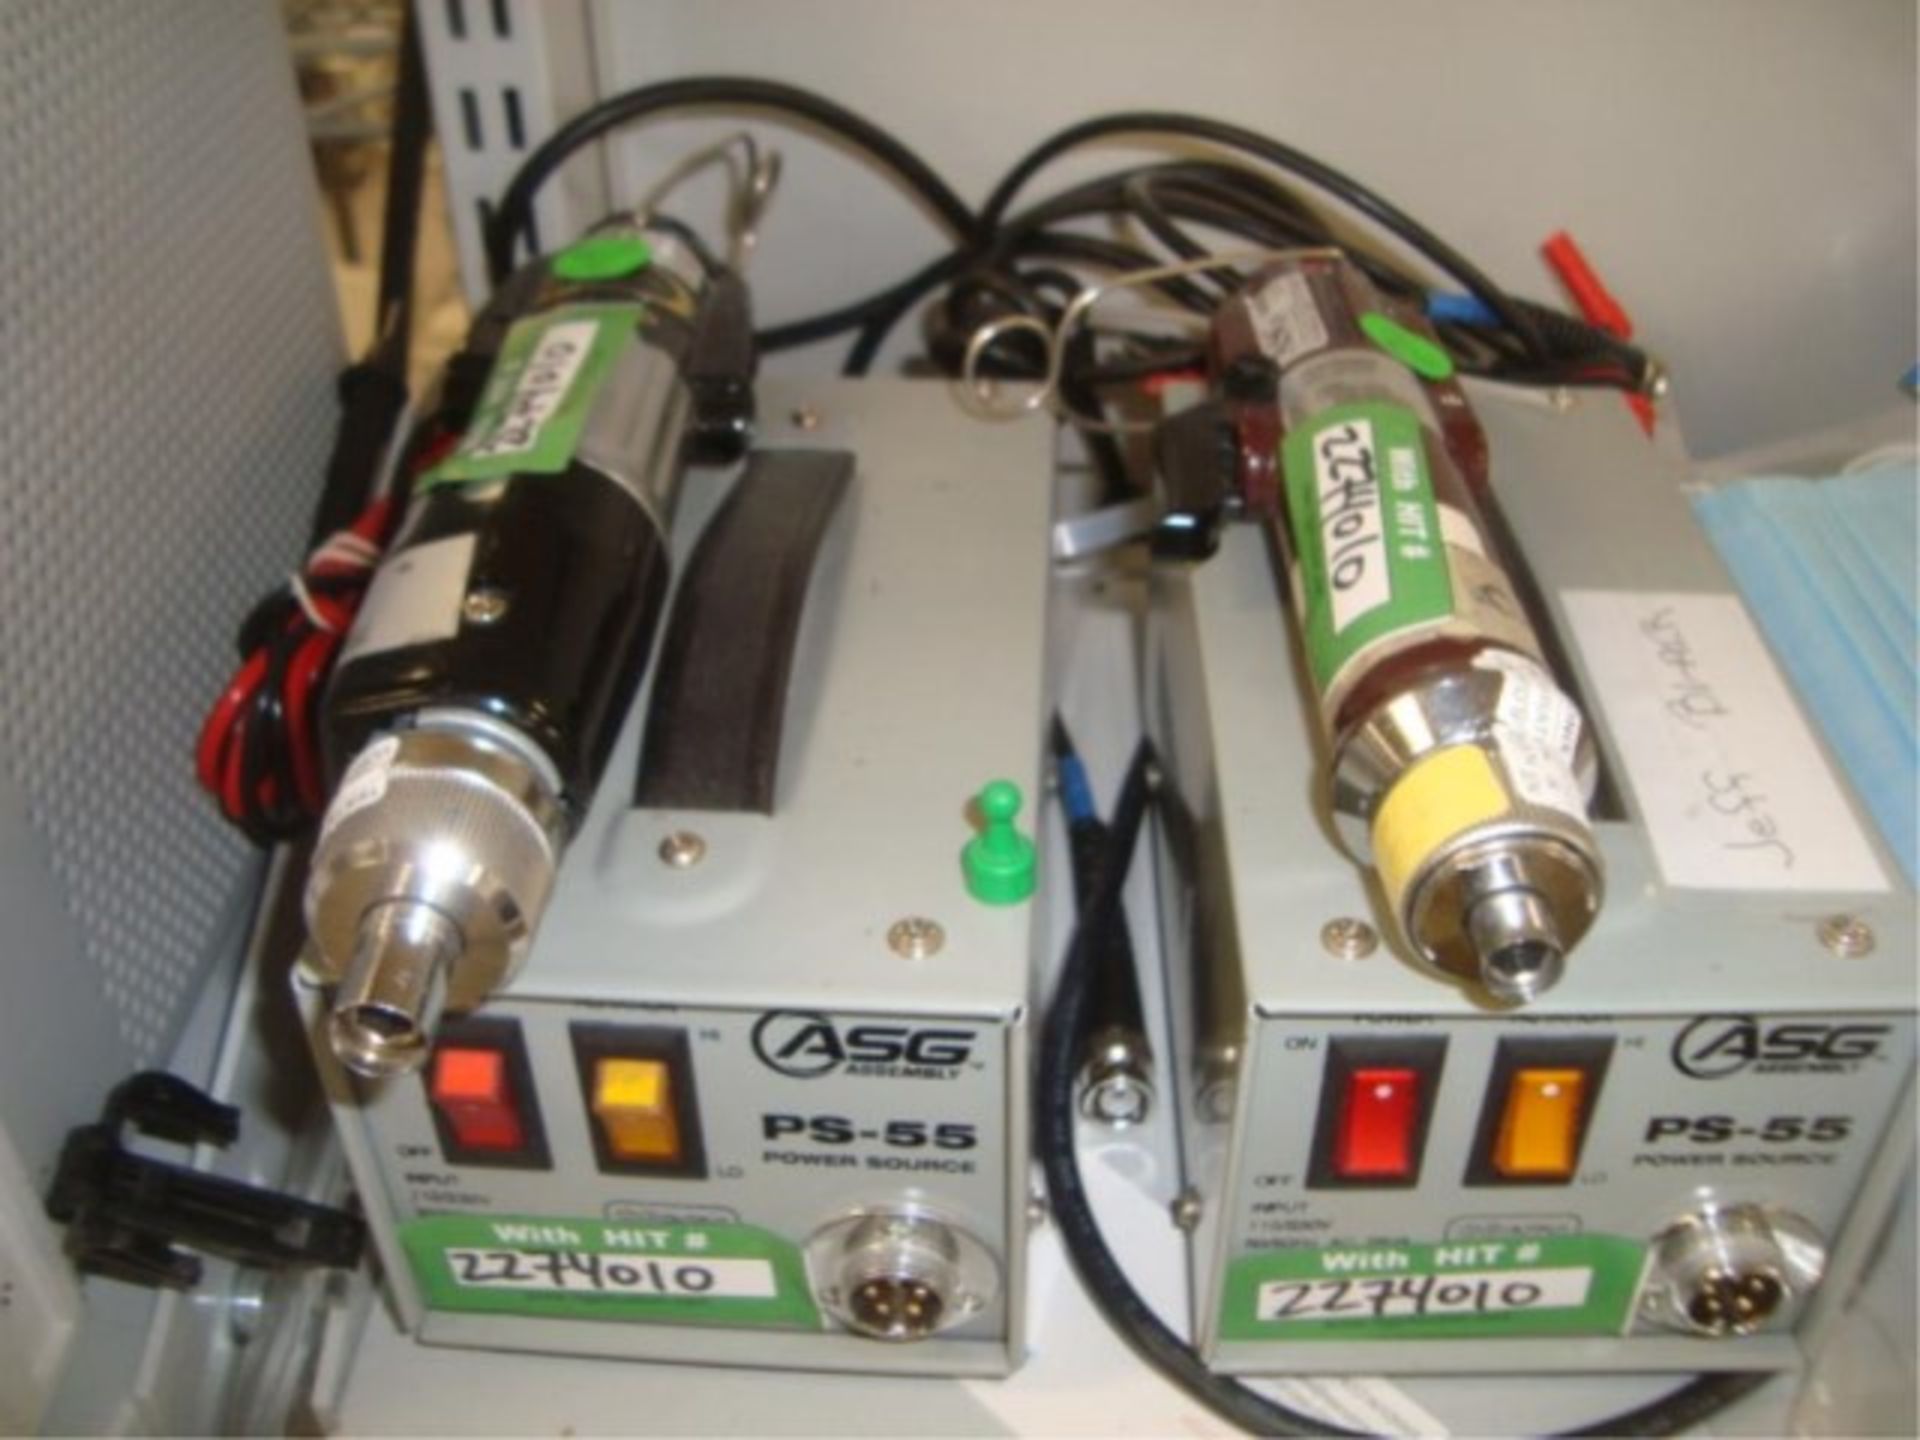 Torque Drivers With Power Supplies - Image 3 of 3